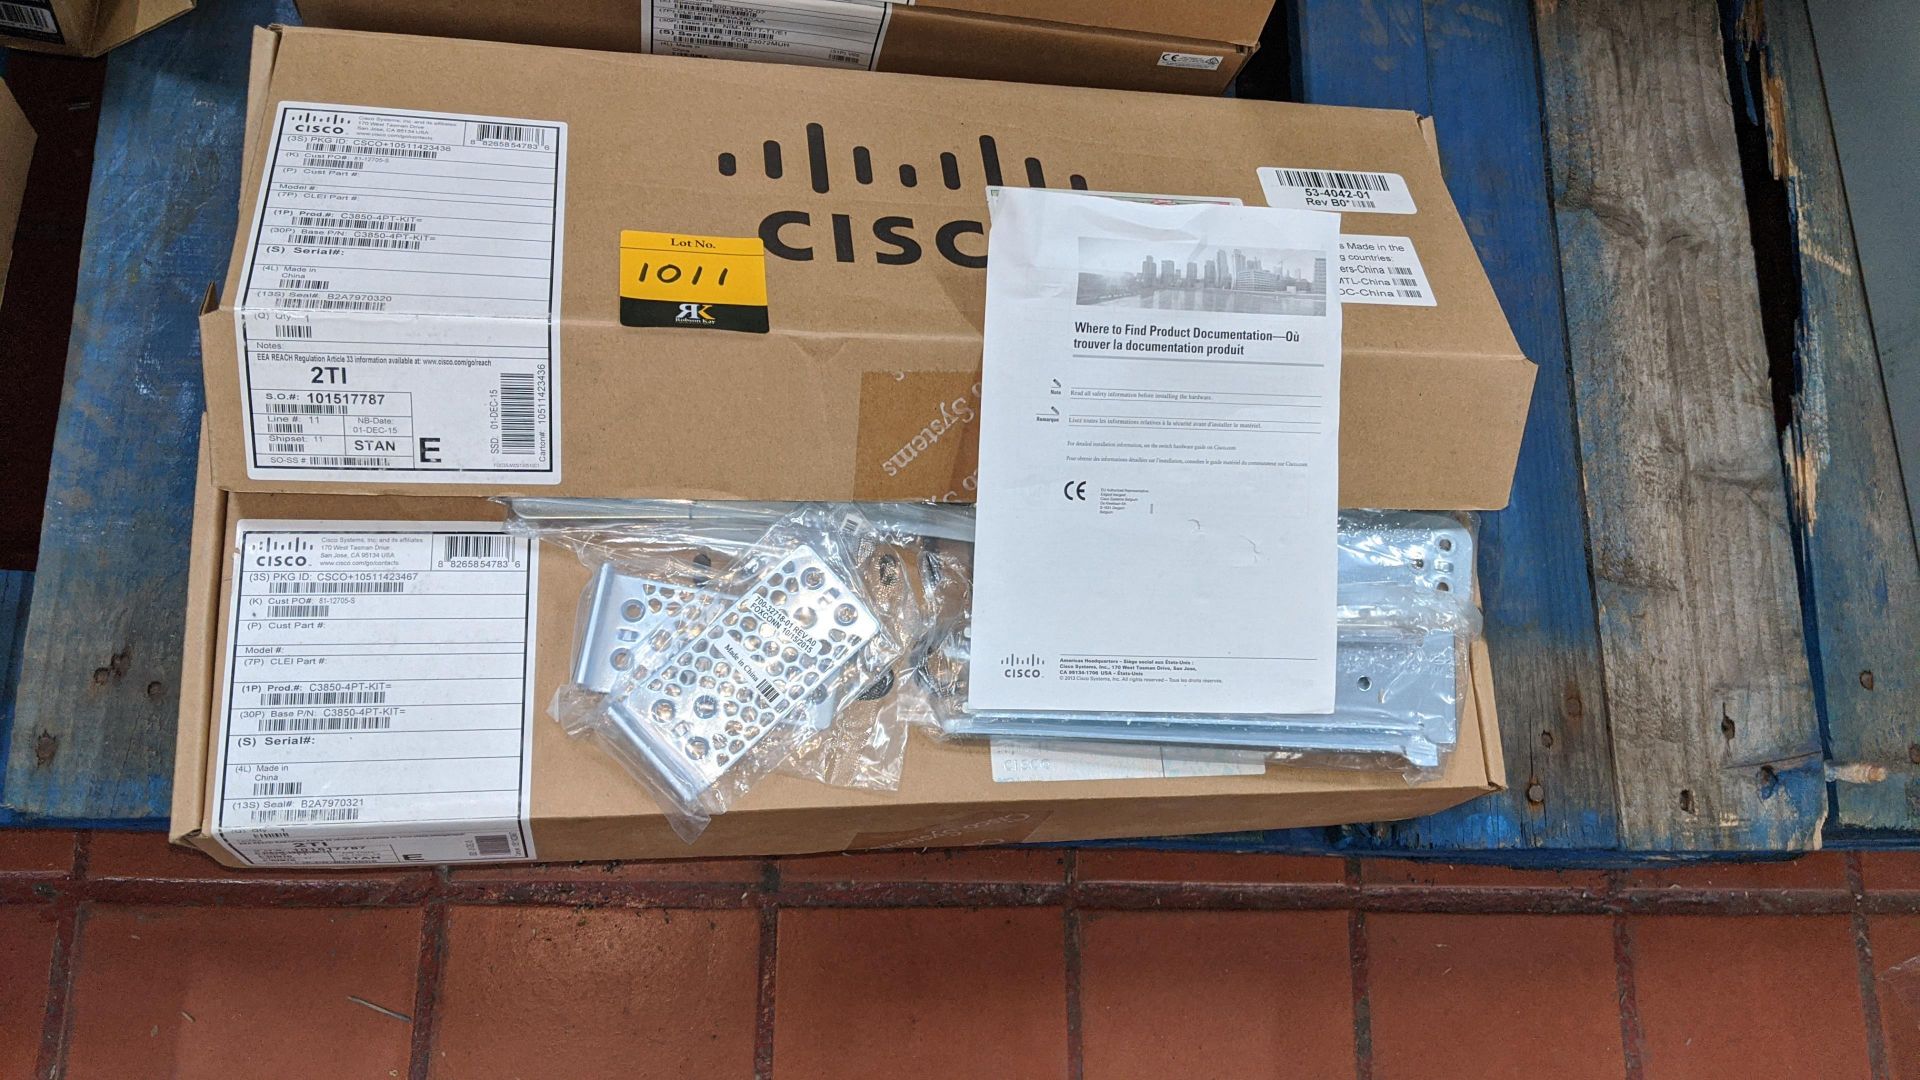 2 off Cisco bracket/mounting kits, product code C3850-4PT-KIT. This is one of a large number of lots